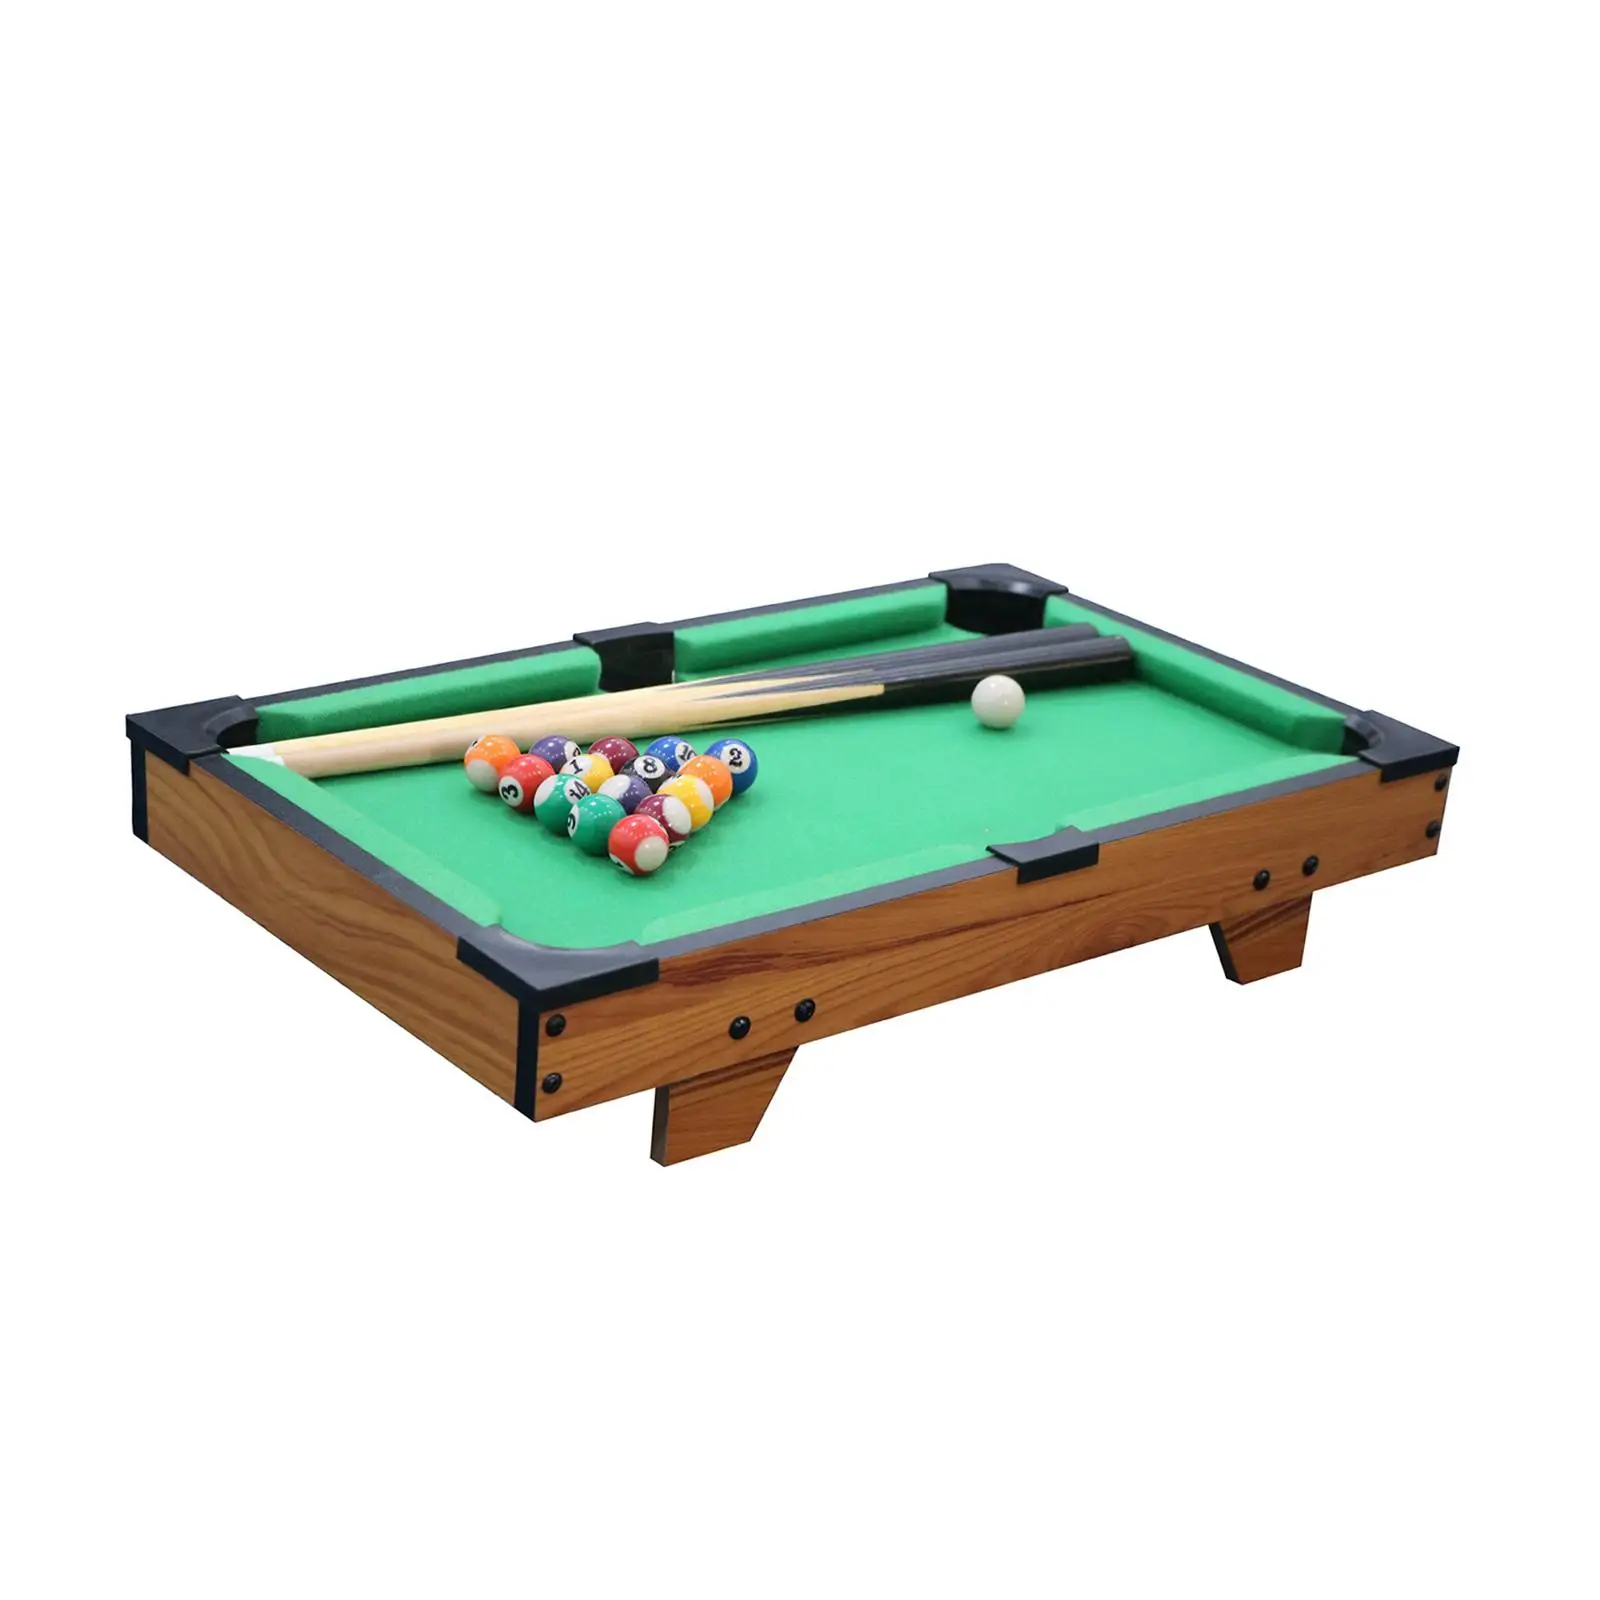 Portable Mini Table pool, Colorful with 2 Sticks Miniature Game Set Snooker for Entertainment Dorm Desk Kids Office